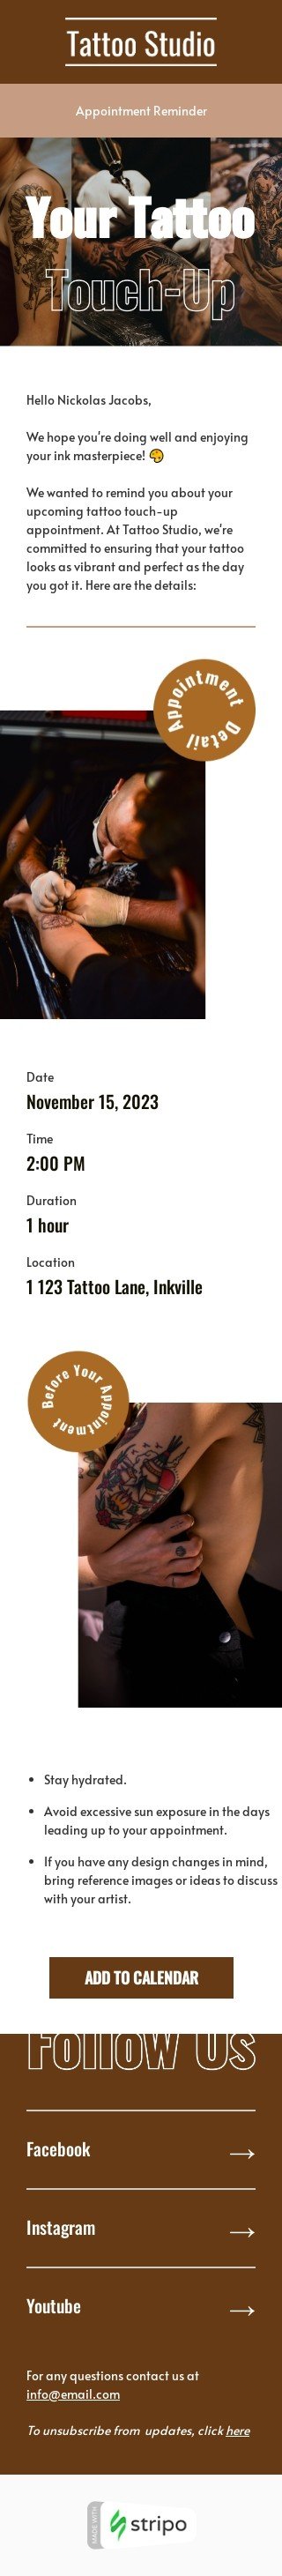 Events email template "Tattoo touch-up" for tattoo industry mobile view